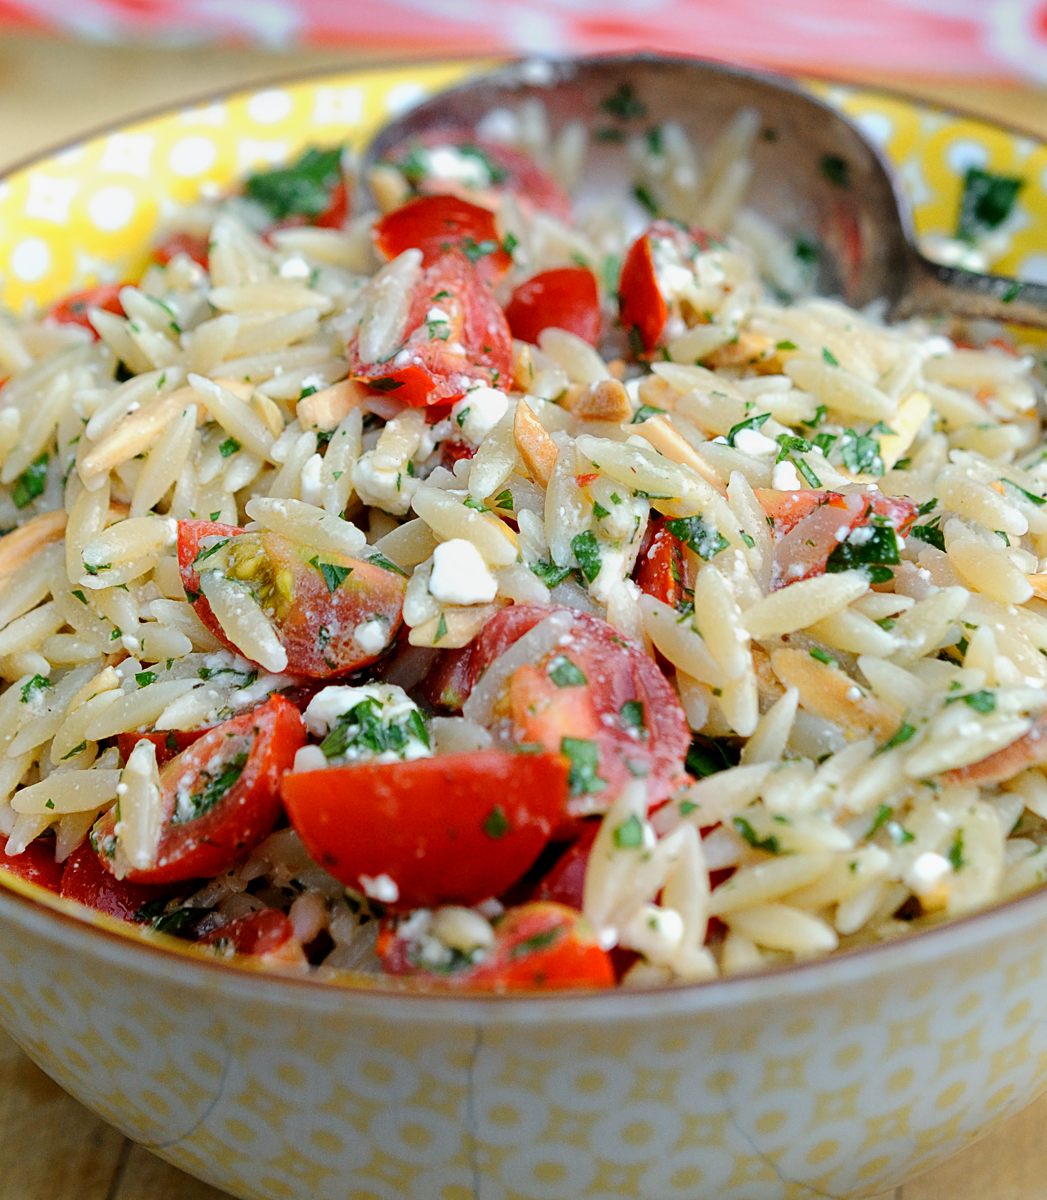 Orzo with Feta Cherry Tomatoes, Yellow Noodle Bowl